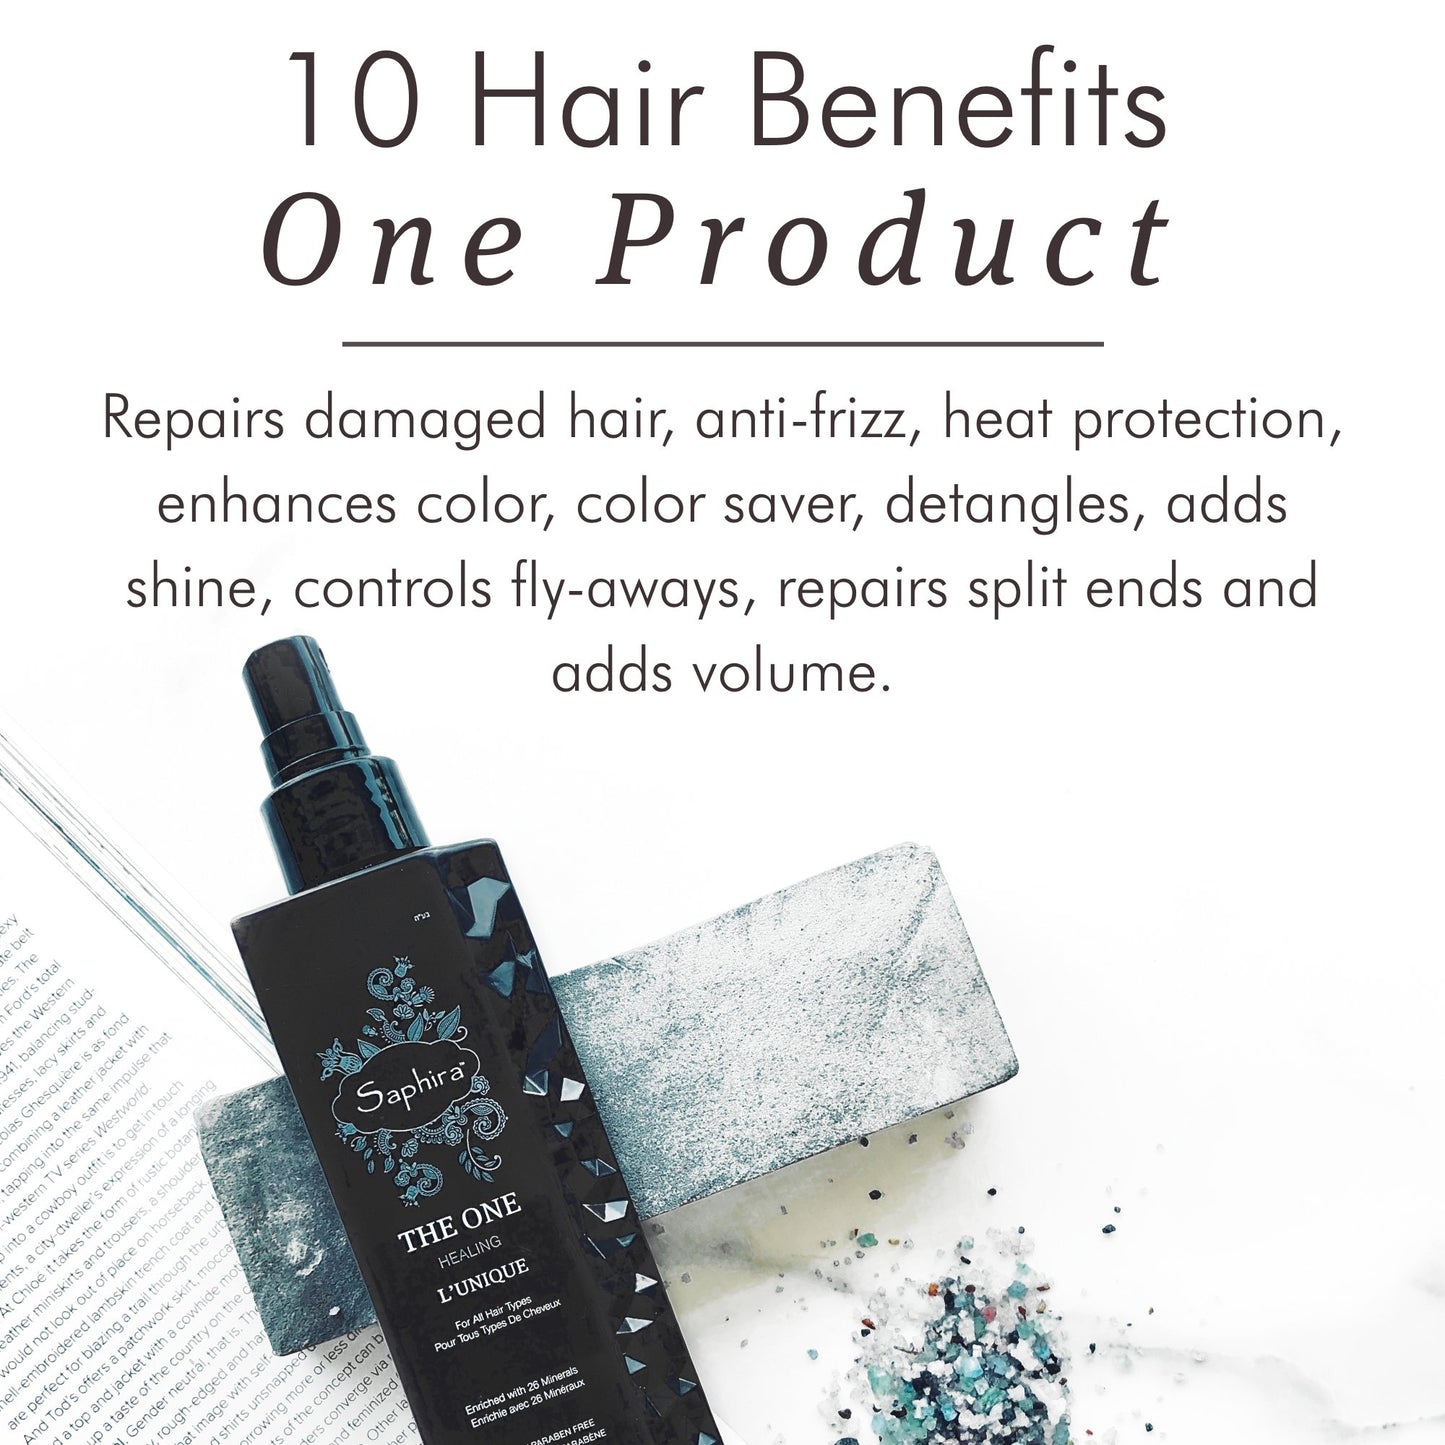 10 Hair Benefits  One Product - Repairs damaged hair, anti-frizz, heat protection, enhances color, color saver, detangles, adds shine, controls fly-aways, repairs split ends and adds volume.